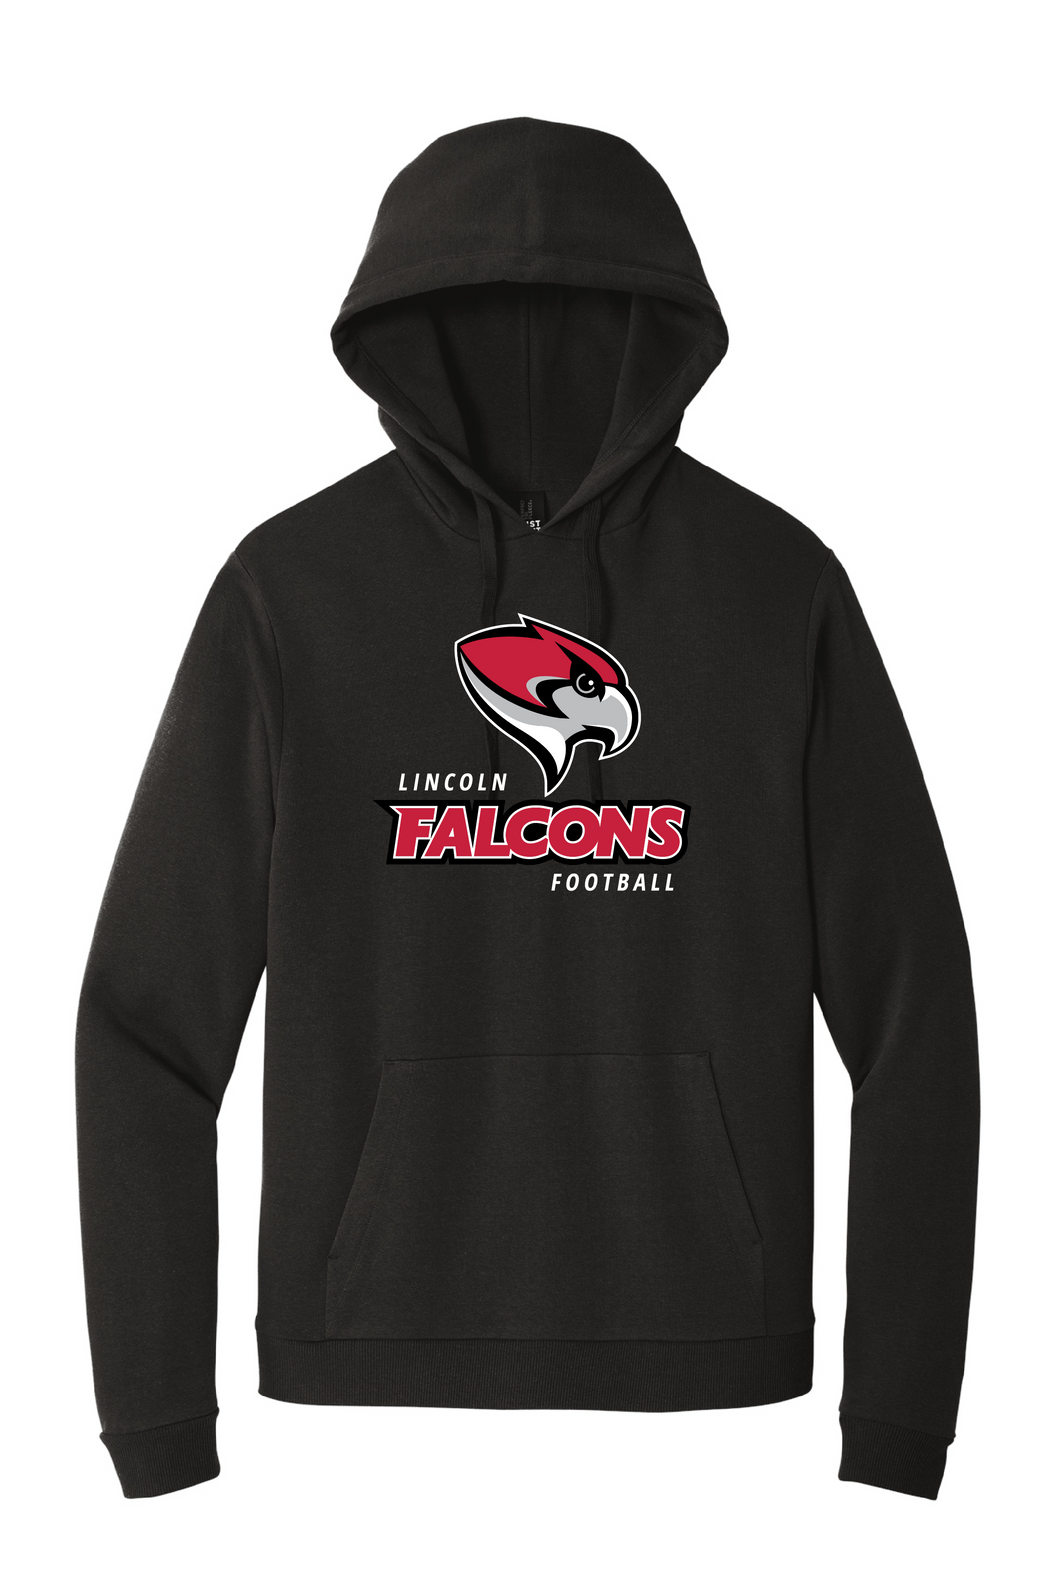 DT1300 Lincoln Falcon FB Hoodie